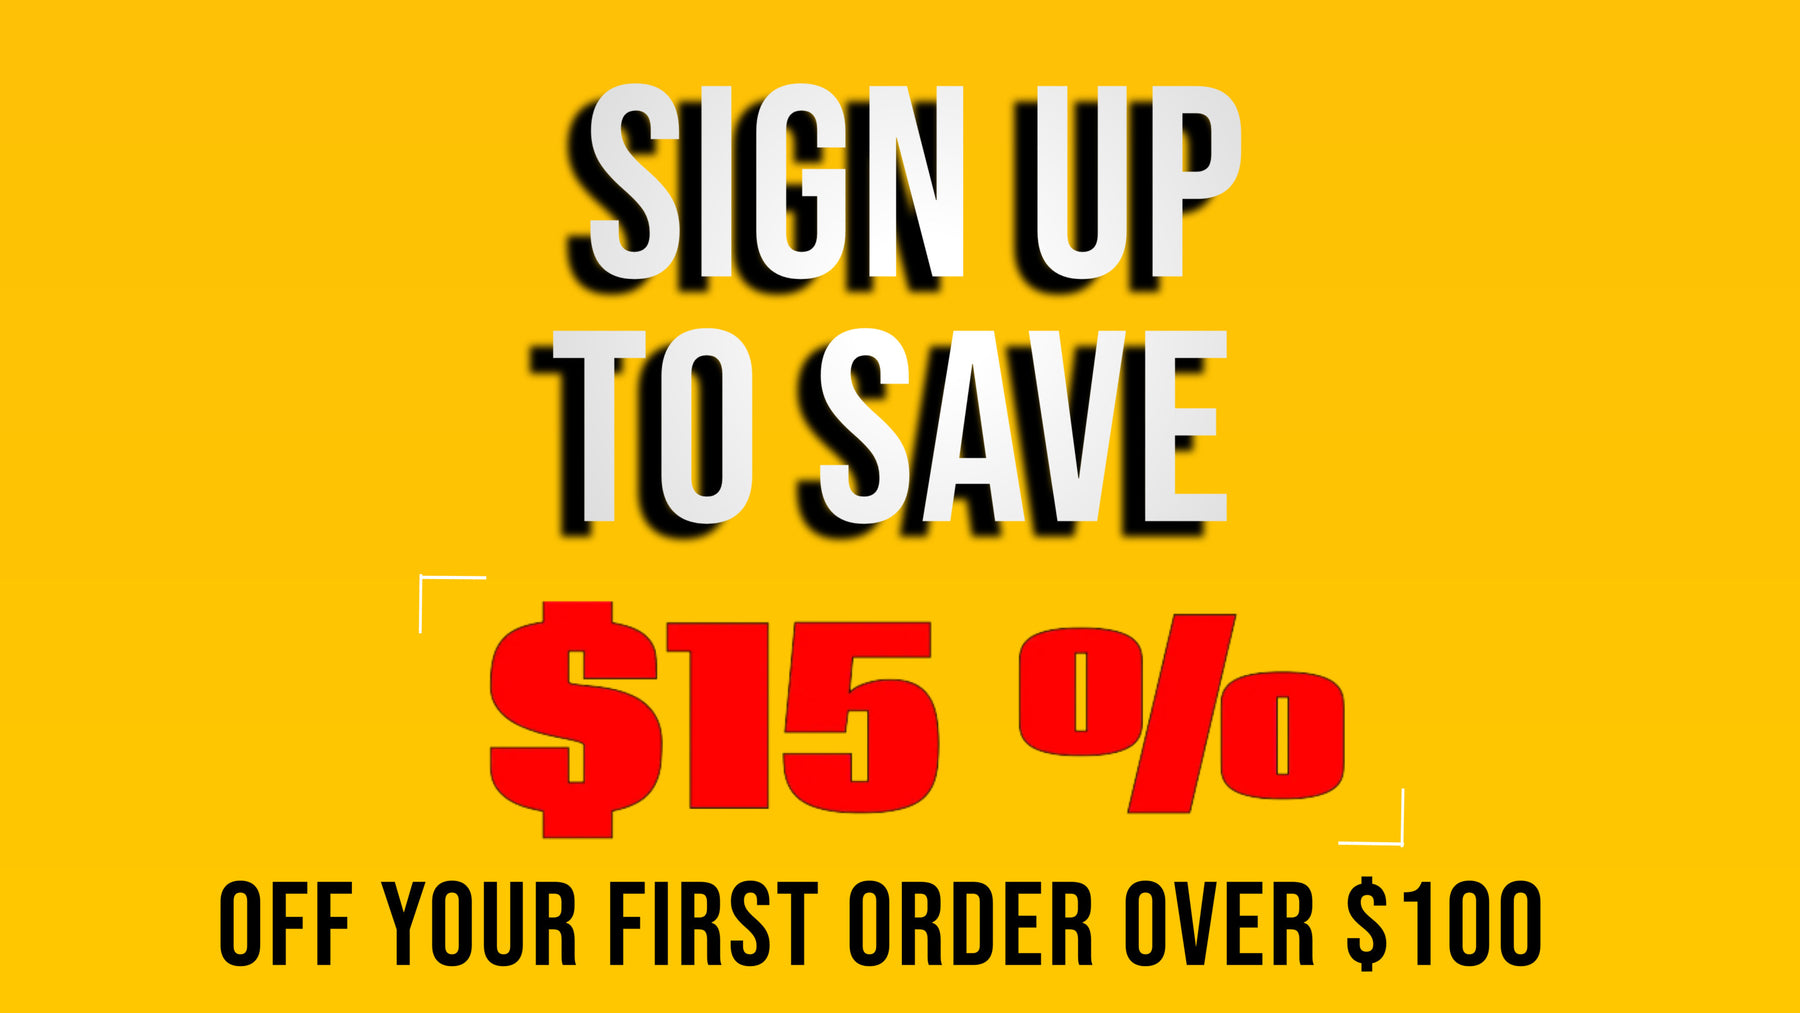 Save 15% off your first order over $100